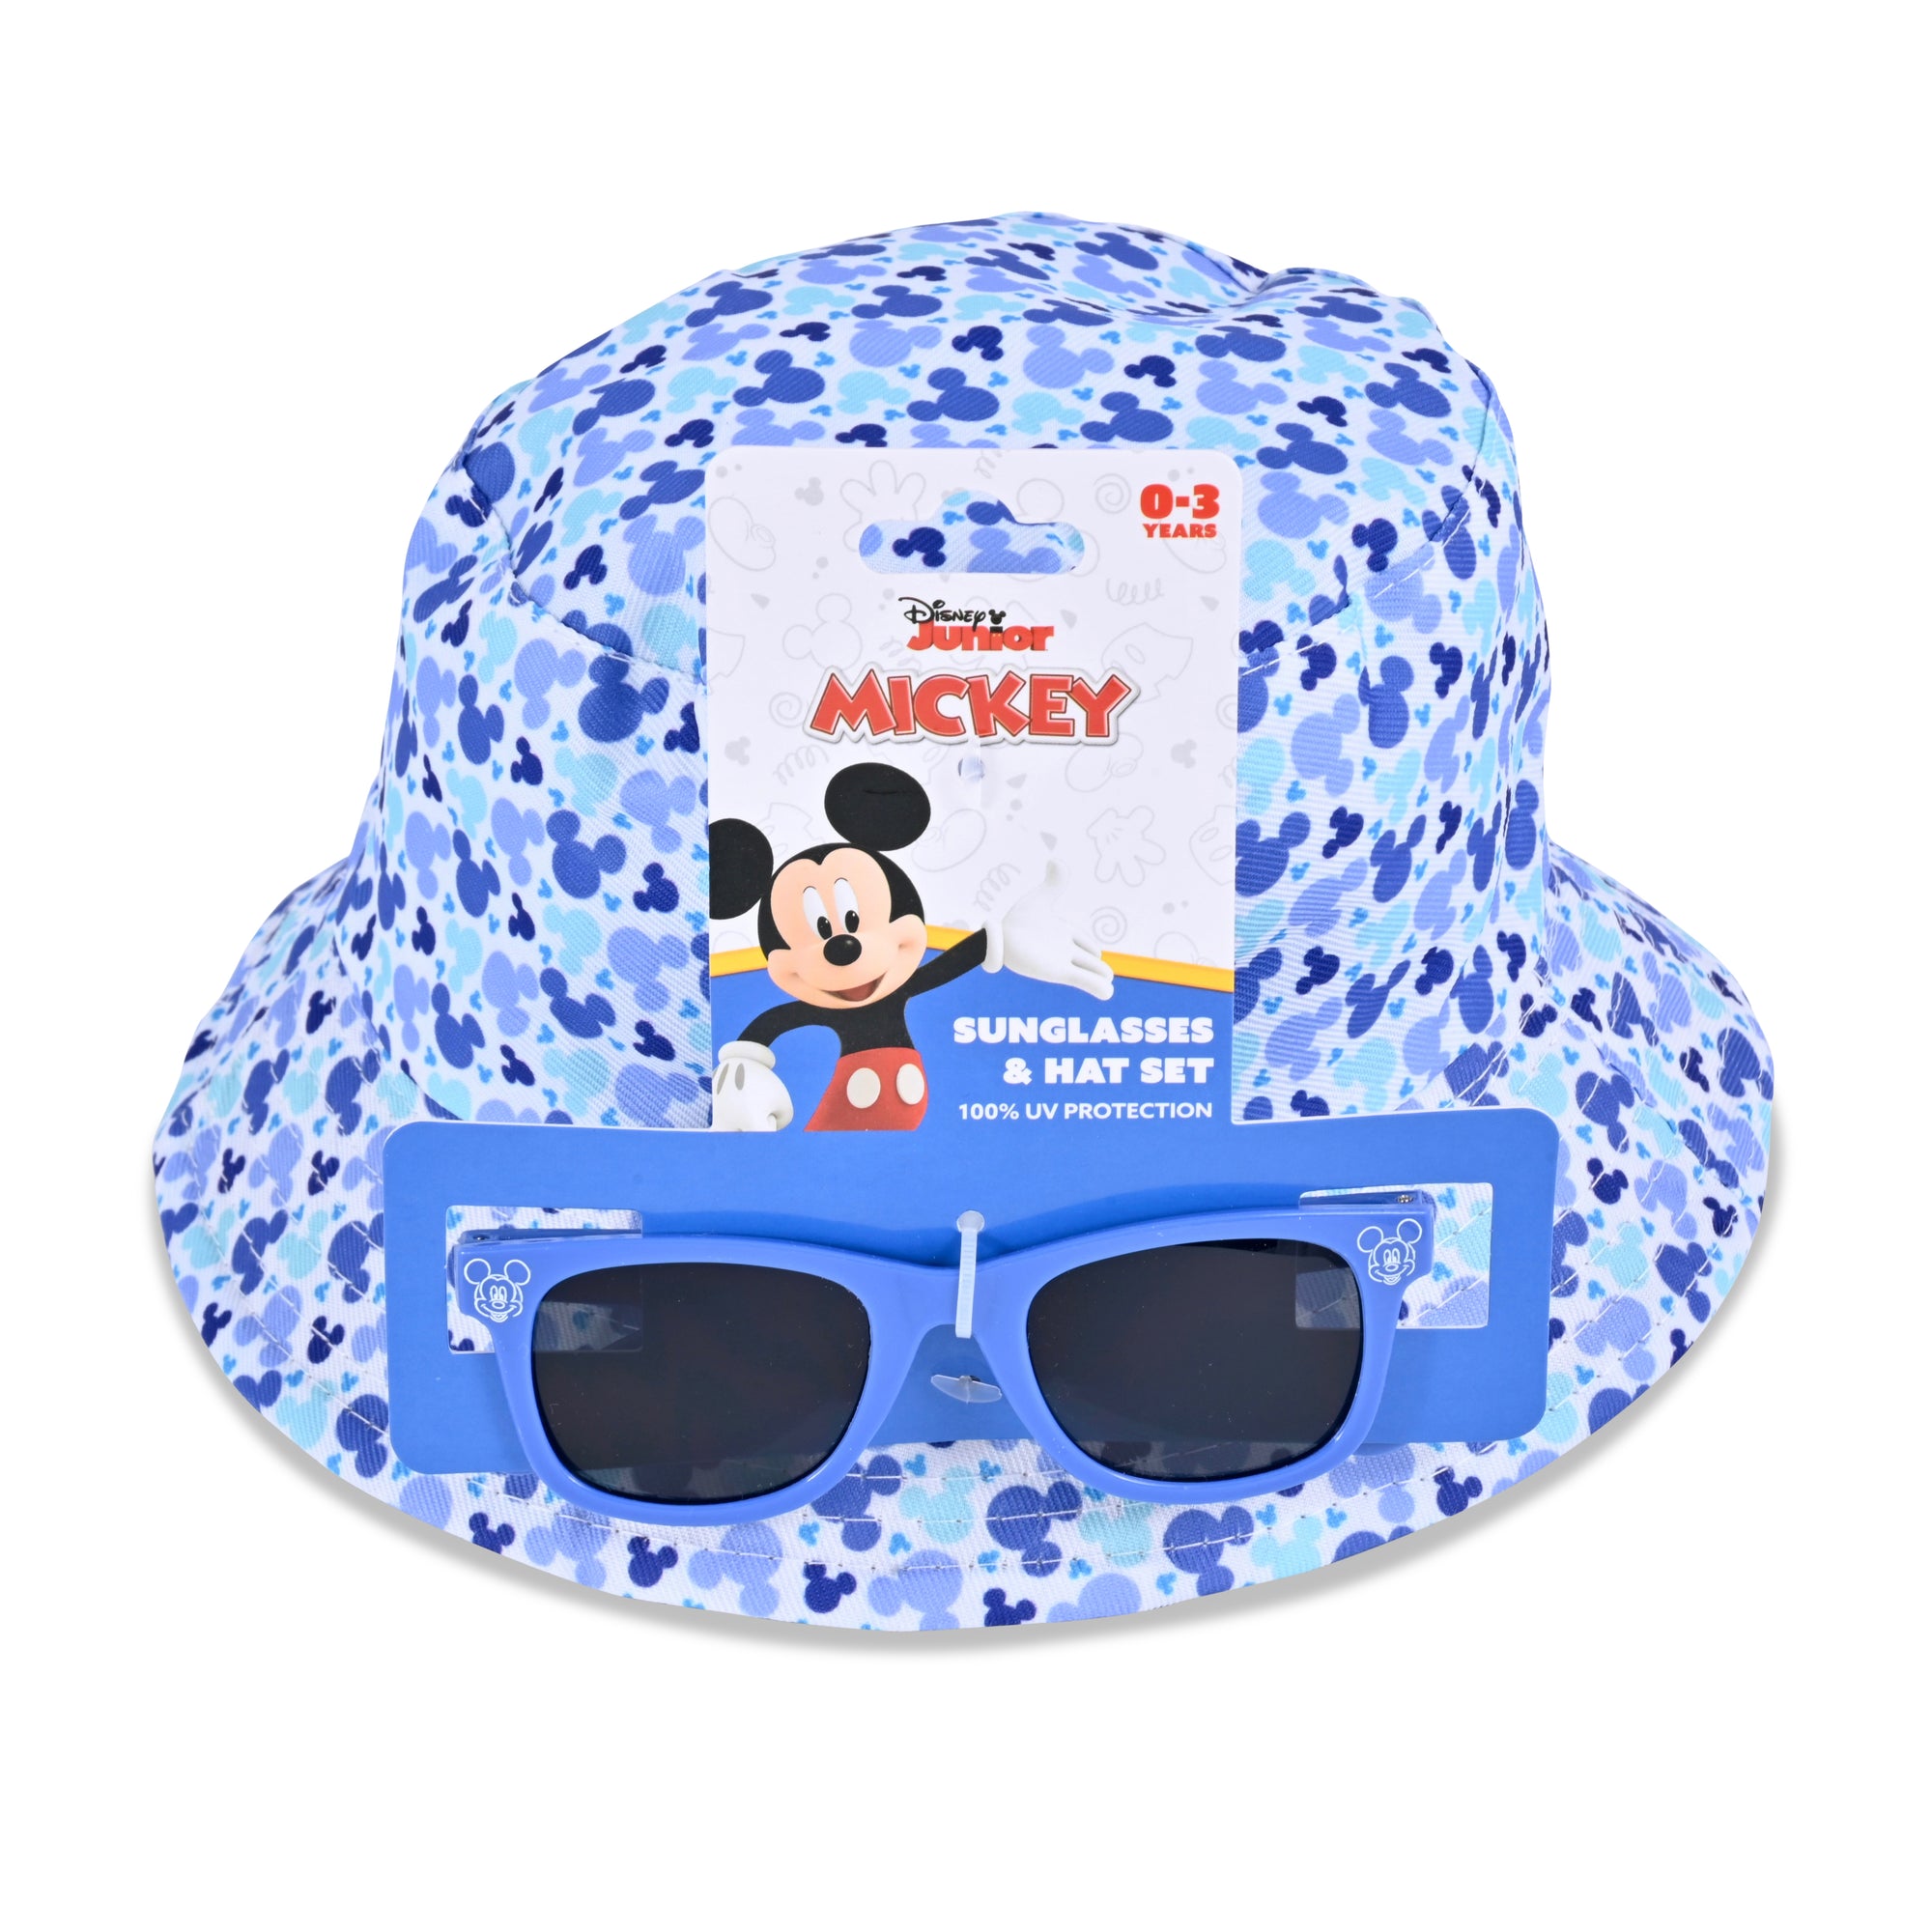 Baby Shoe .com - Disney Mickey Mouse Bucket Hat and Sunglasses for Boys – Protective Sunglasses and Hat - for 